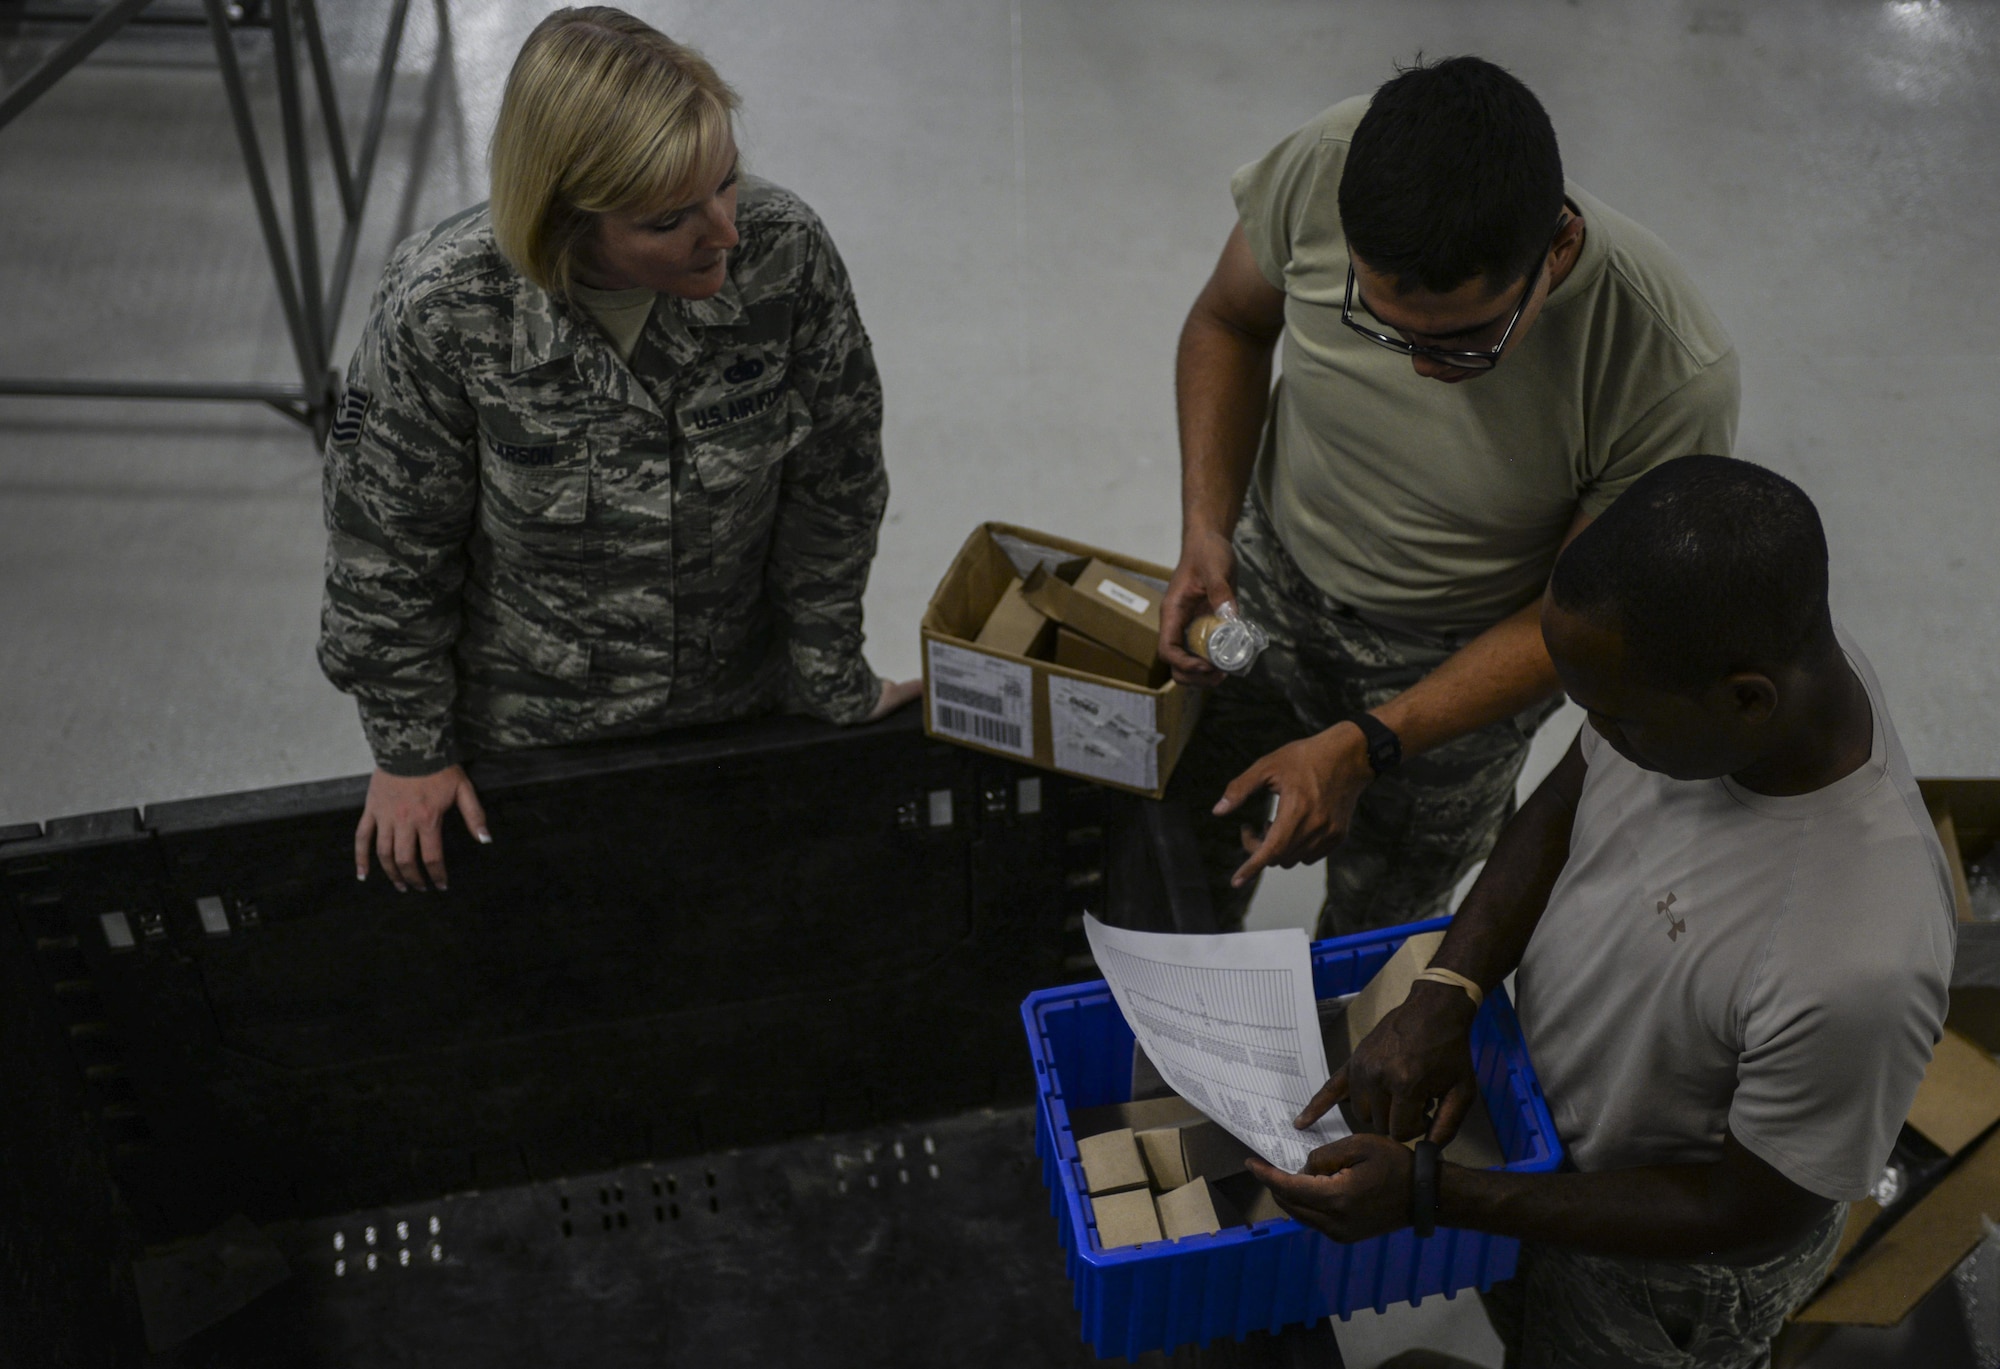 Tech. Sgt. Tiffany Larson, 99th Logistics Readiness Squadron NCO in-charge of the F-35 Aircraft Parts Store, works with her Airmen to move F-35 parts from the store’s old location into their new building at Nellis Air Force Base, Nev., June 6. The Airmen of the parts store will be moving to a new location and assisting with the school house curriculum in order to help prepare the Air Force to bring the
F-35 to Initial Operational Capability. (U.S. Air Force photo by Airman 1st Class Kevin Tanenbaum)